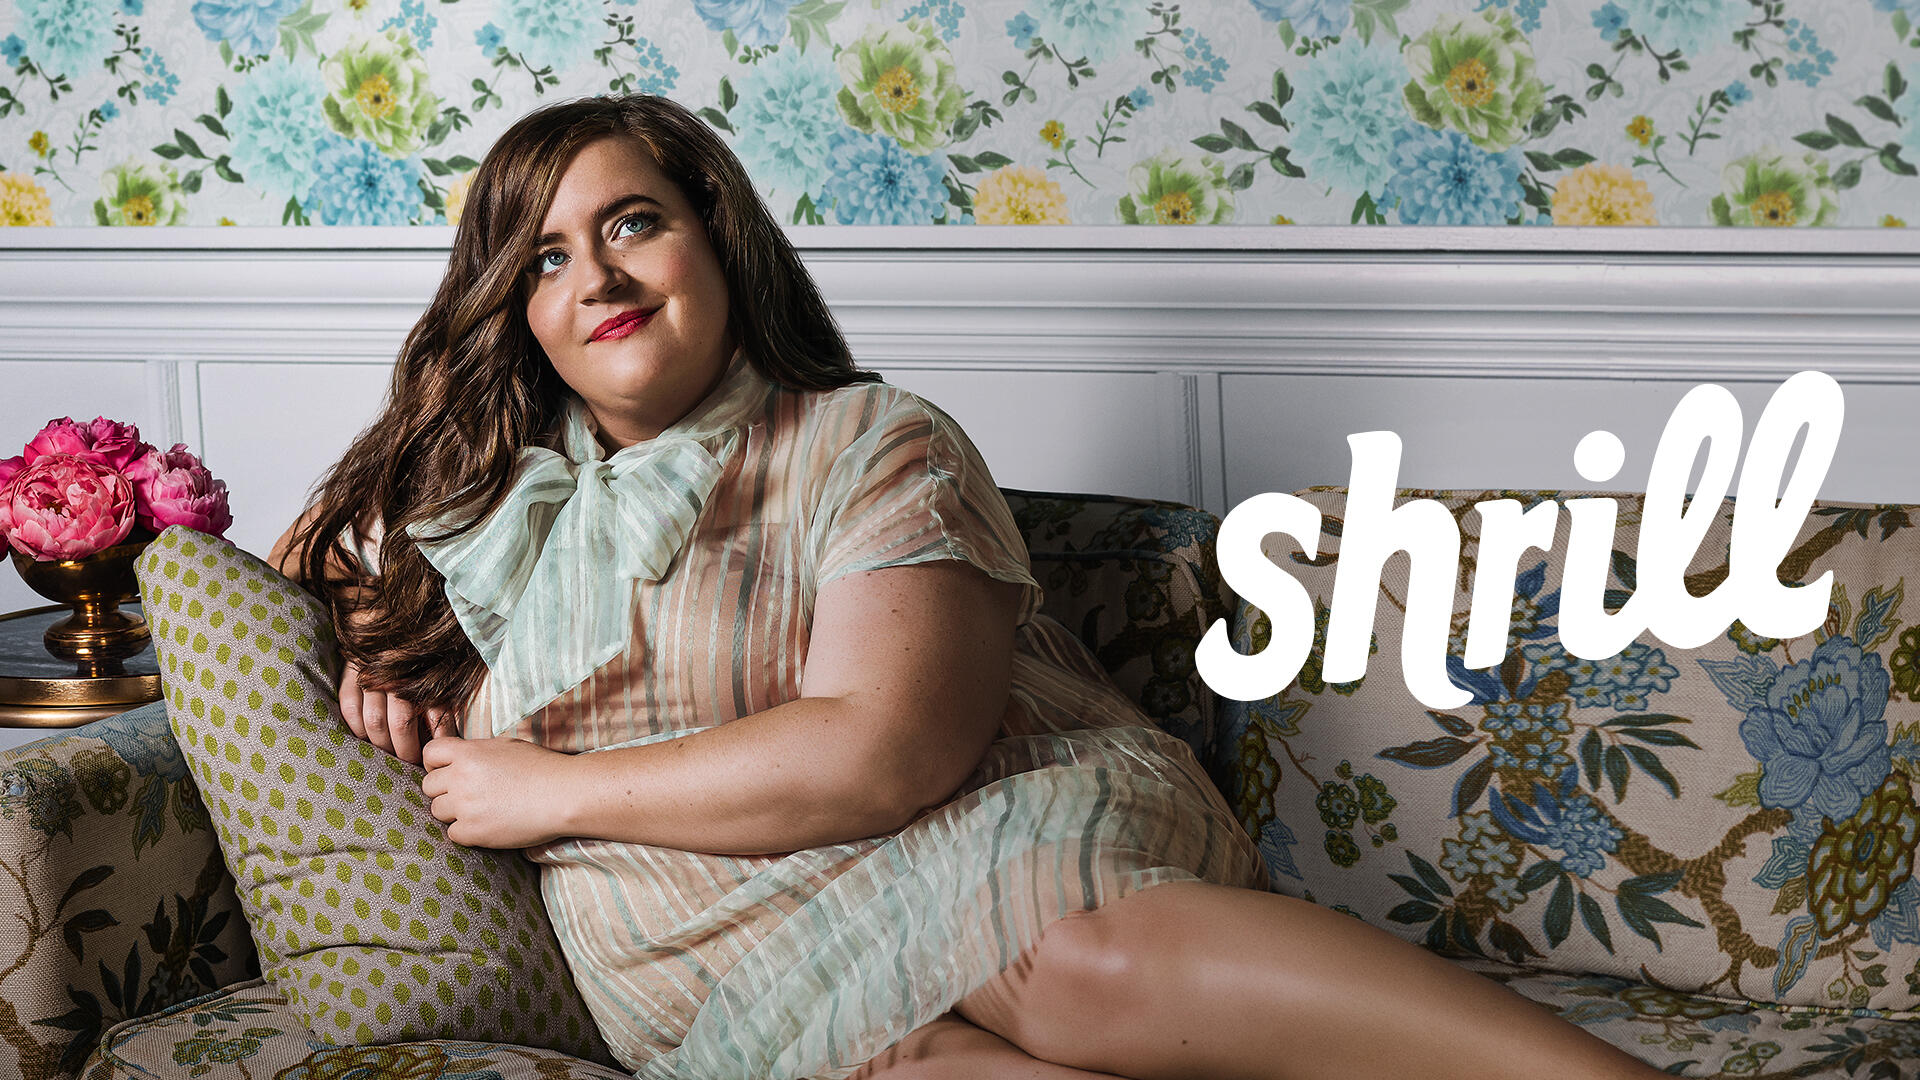 Title art for the series, Shrill, based on the memoir by Lindy West.